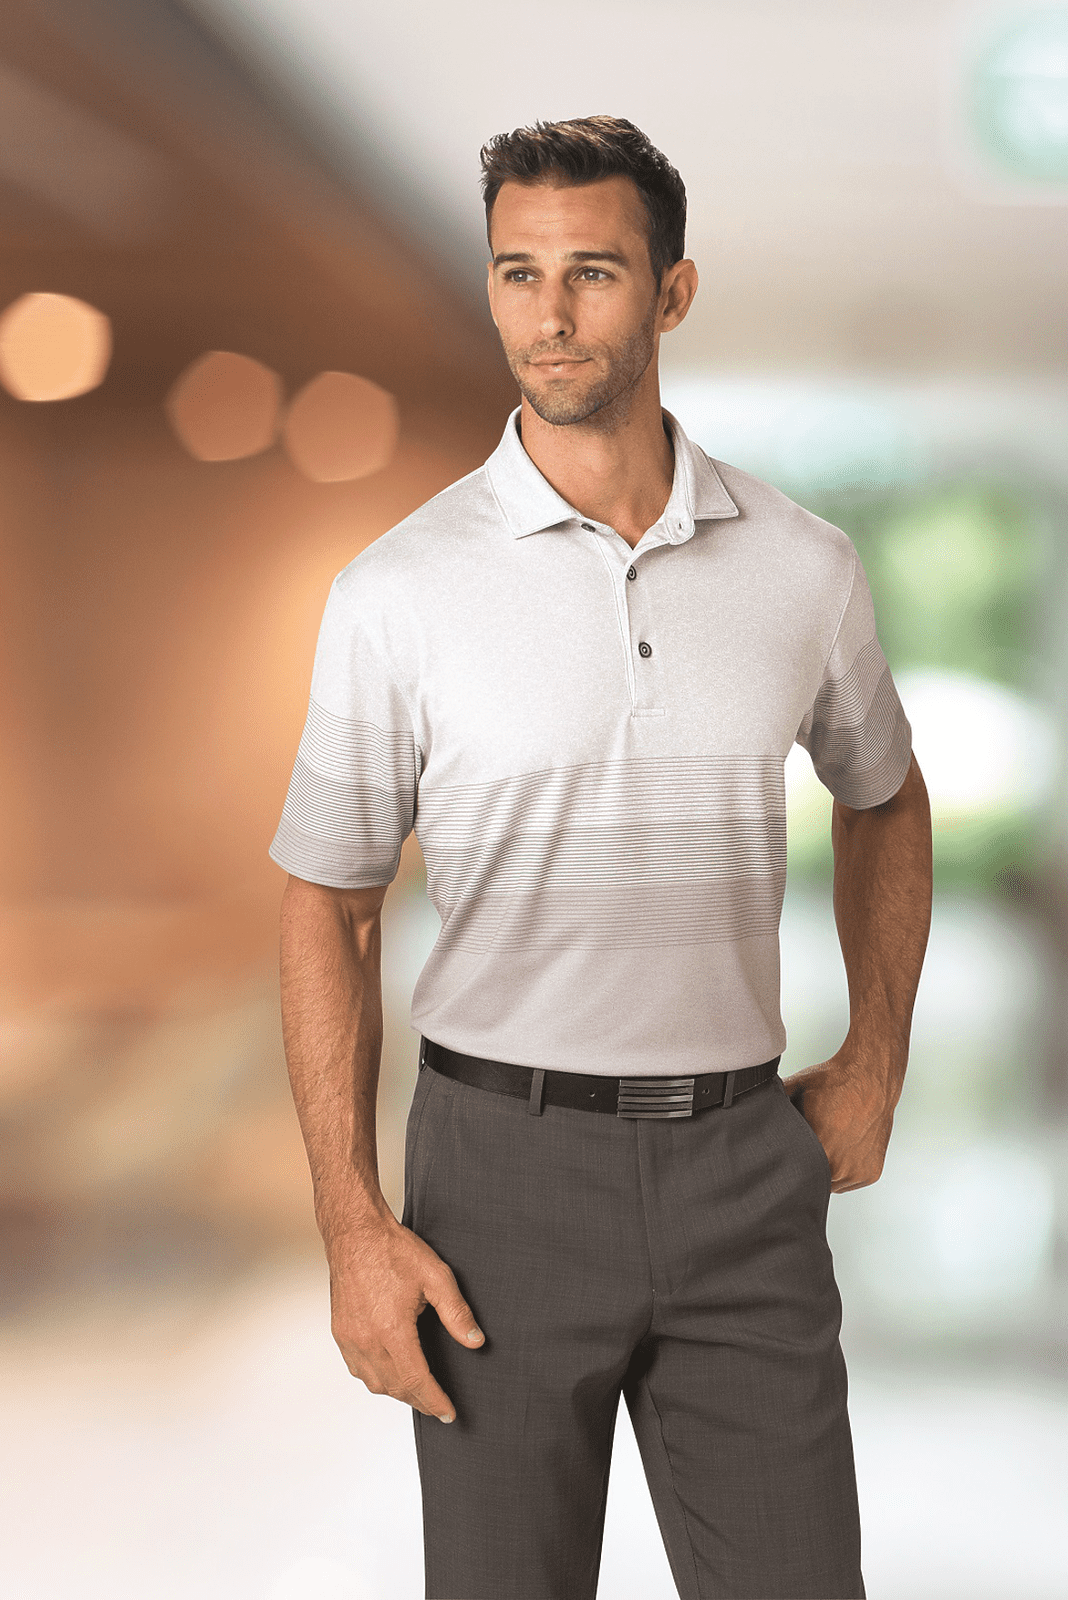 Paragon 153 Belmont Sublimated Heathered Polo - Ash Heather - HIT a Double